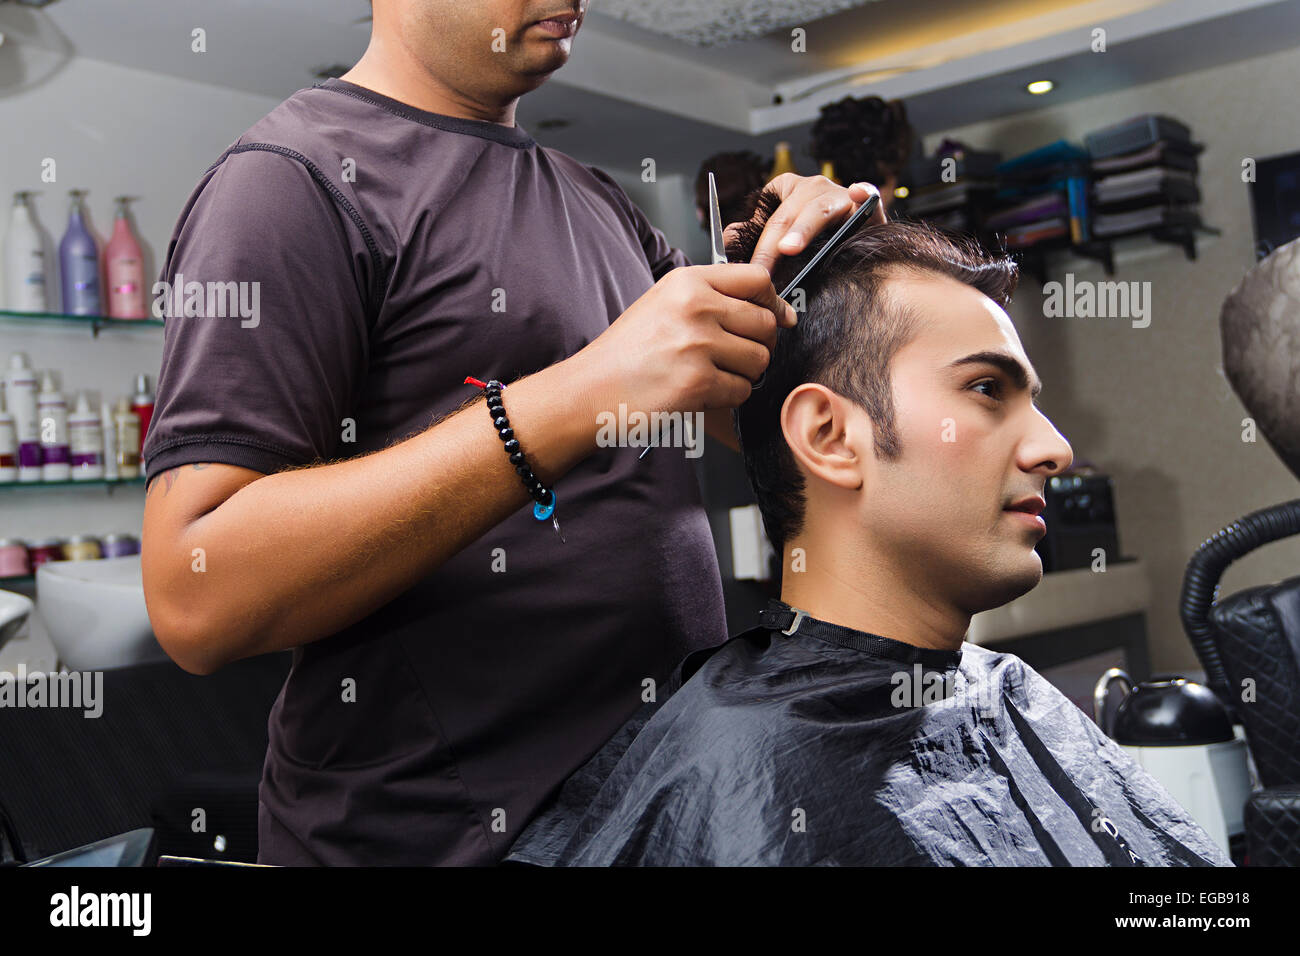 2 Indian People Hairdresser Cutting Saloon Stock Photo 78924532